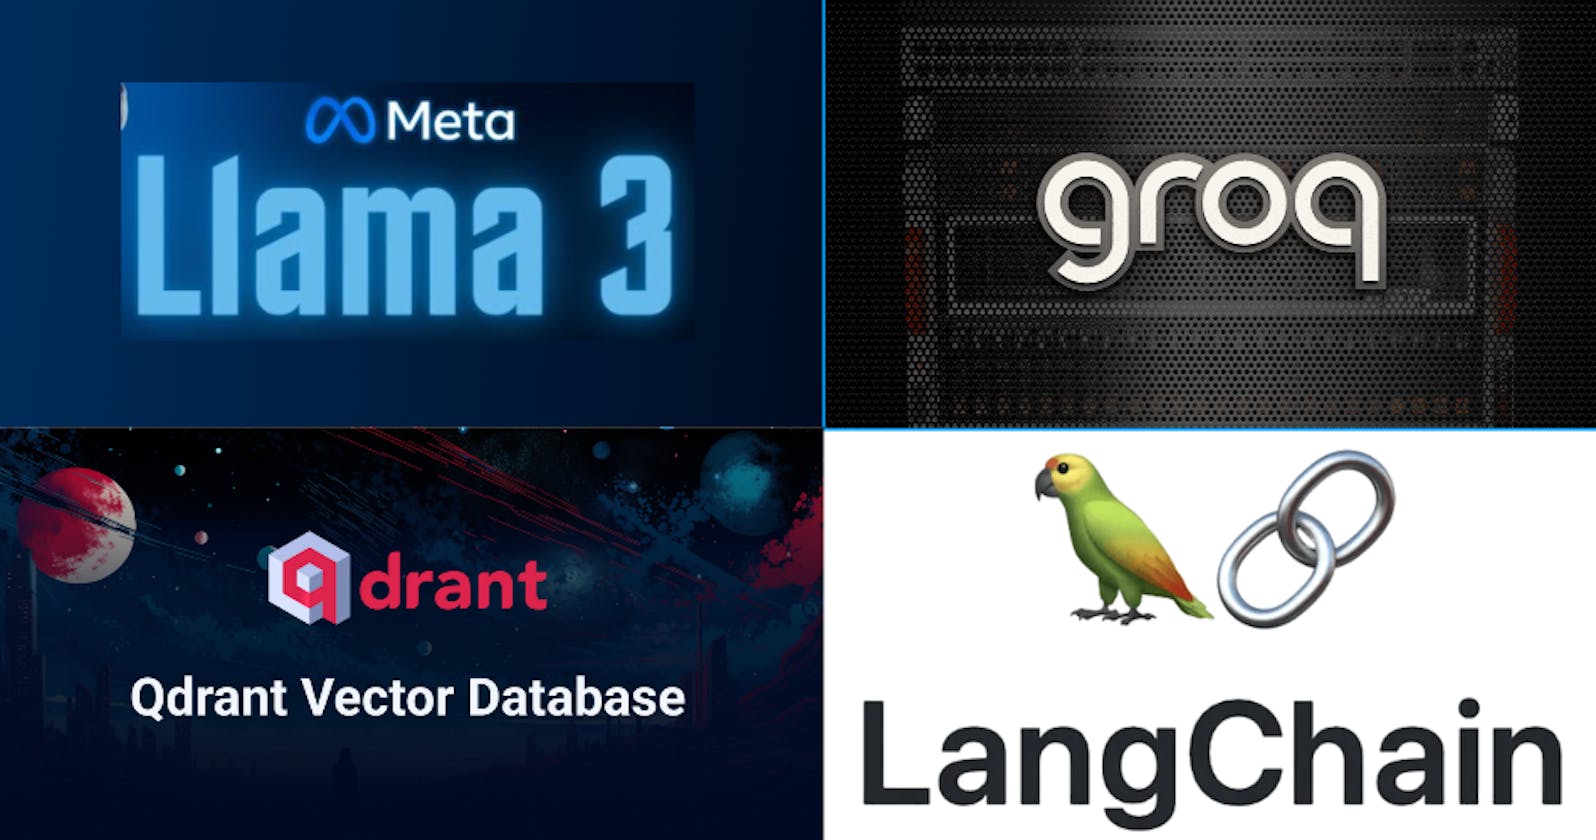 Building RAG in 2024 with Langchain, Groq, Llama3, and Qdrant